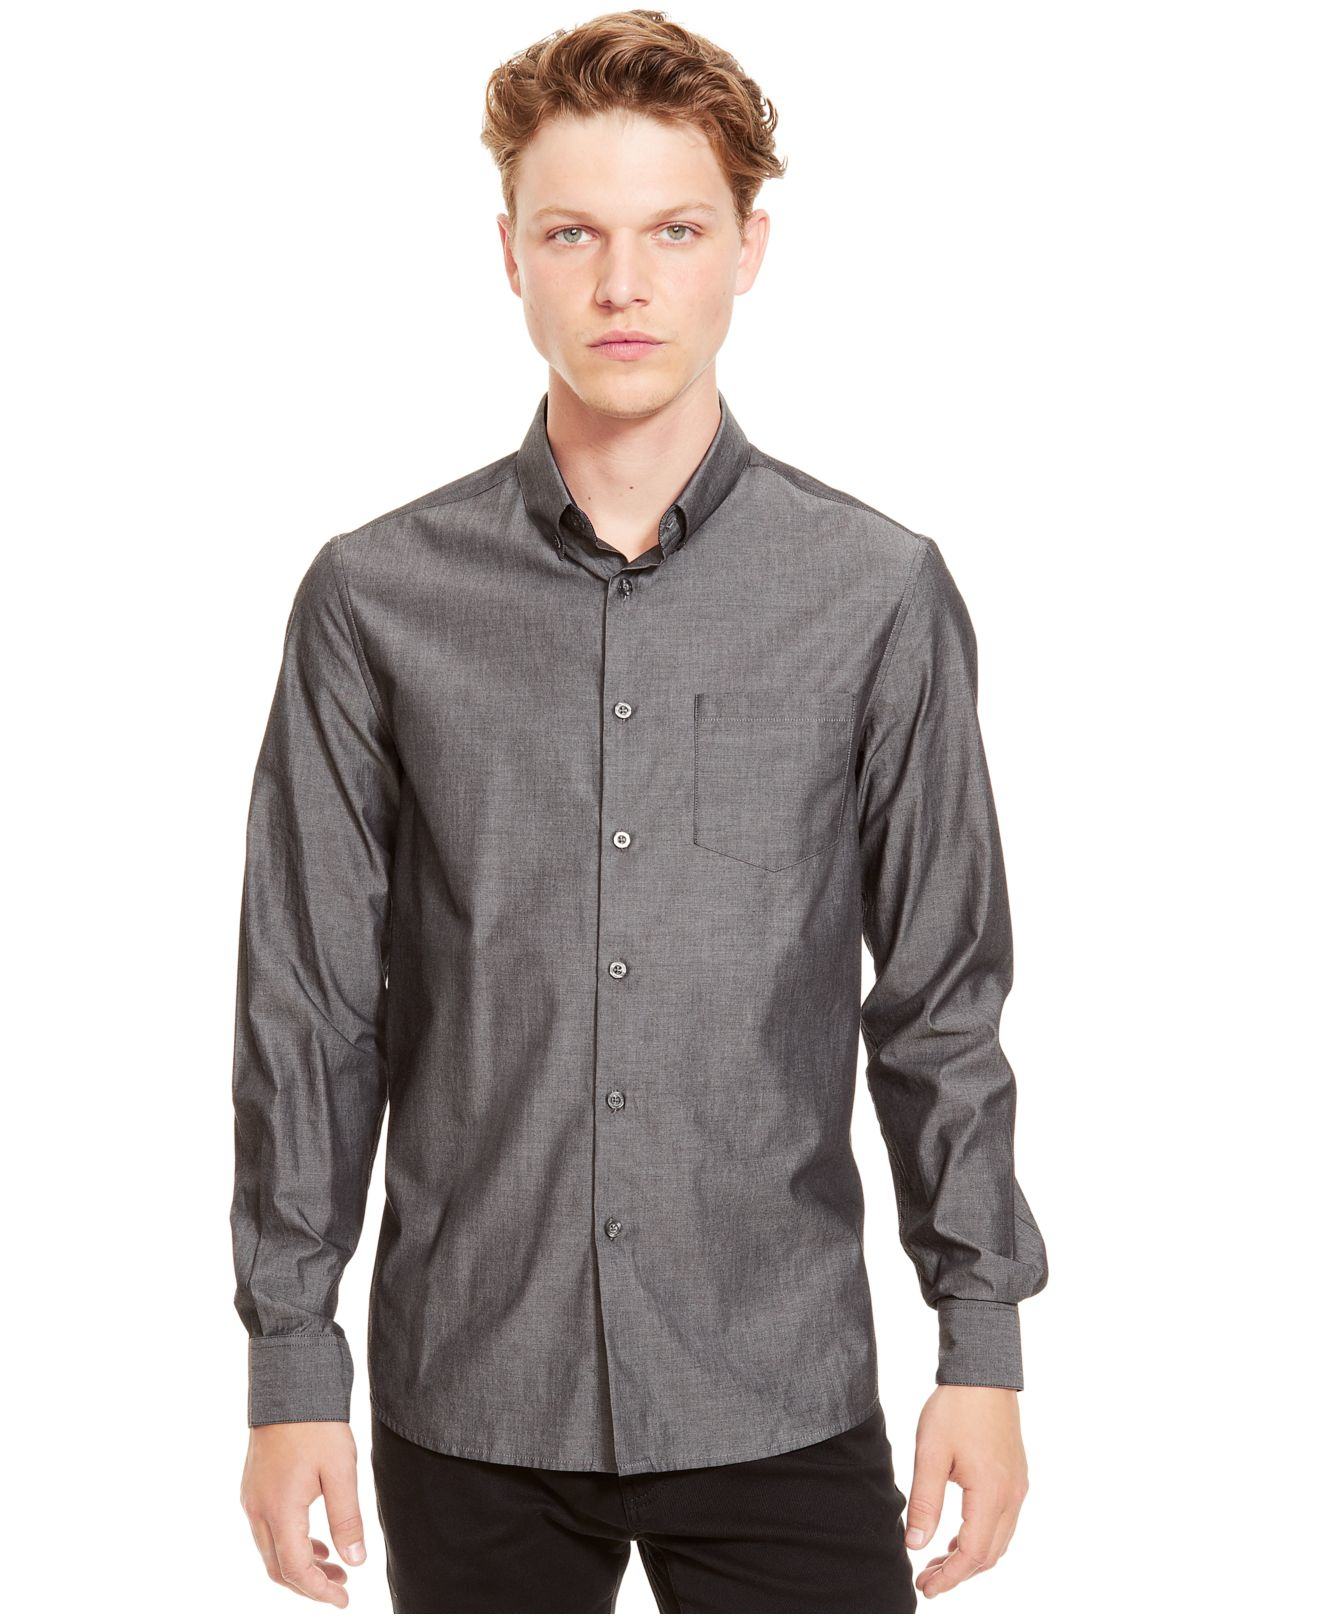 Lyst - Kenneth Cole Reaction Slim-fit Iridescent Shirt in Black for Men